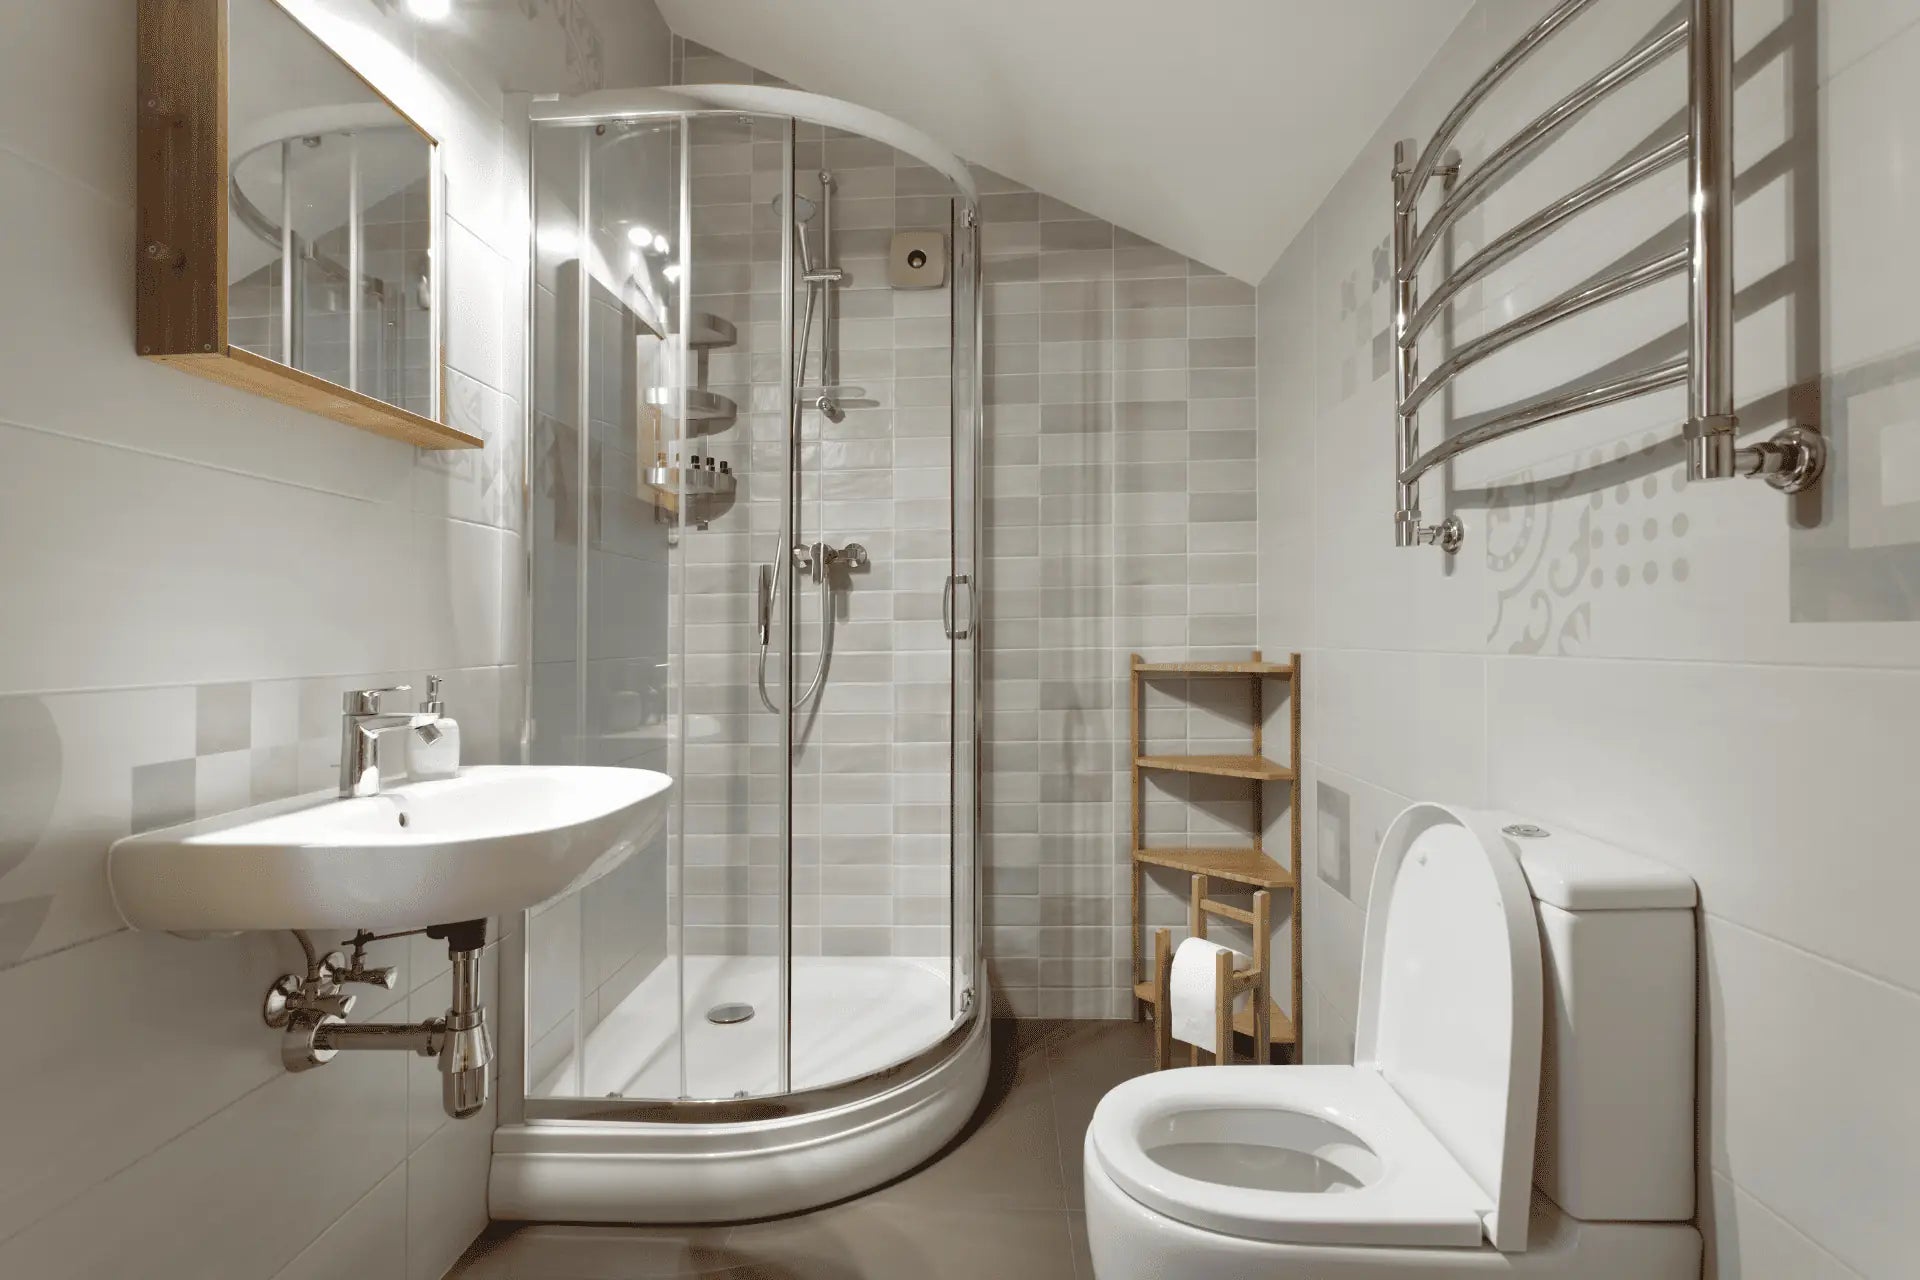 A small bathroom in the basement of a modern home